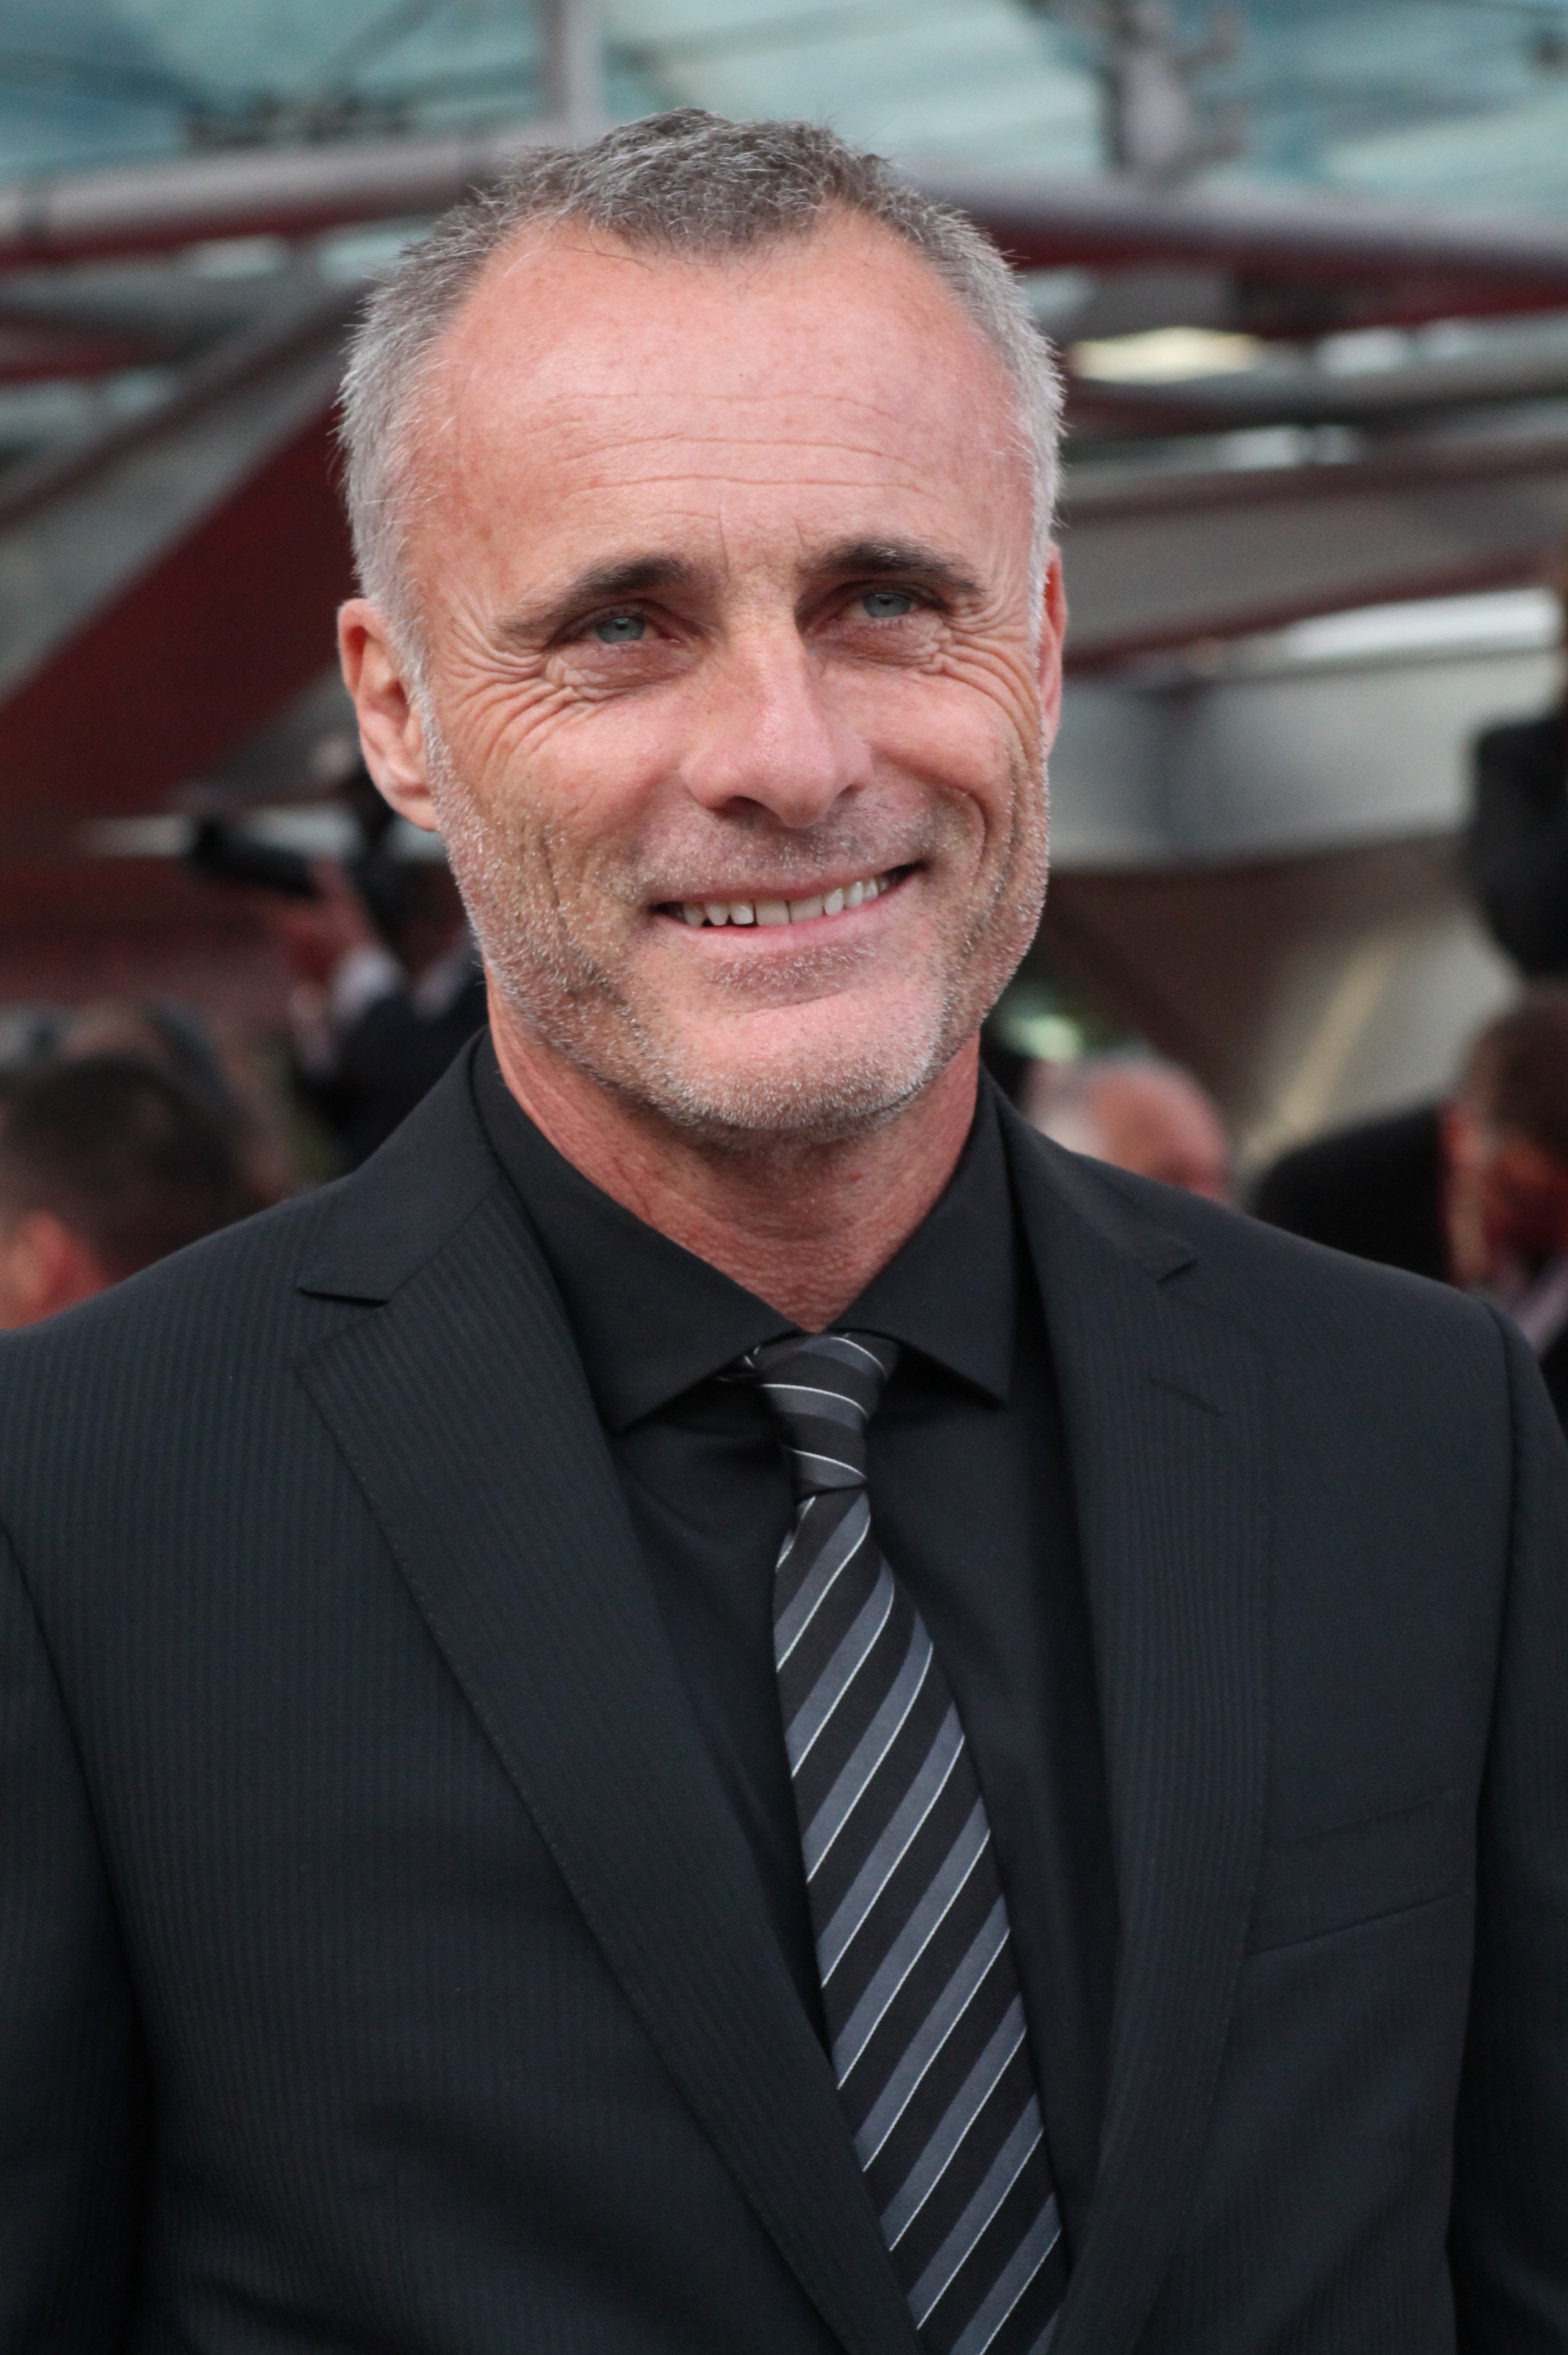 Timothy V Murphy hosting the Monte Carlo Television Festival.